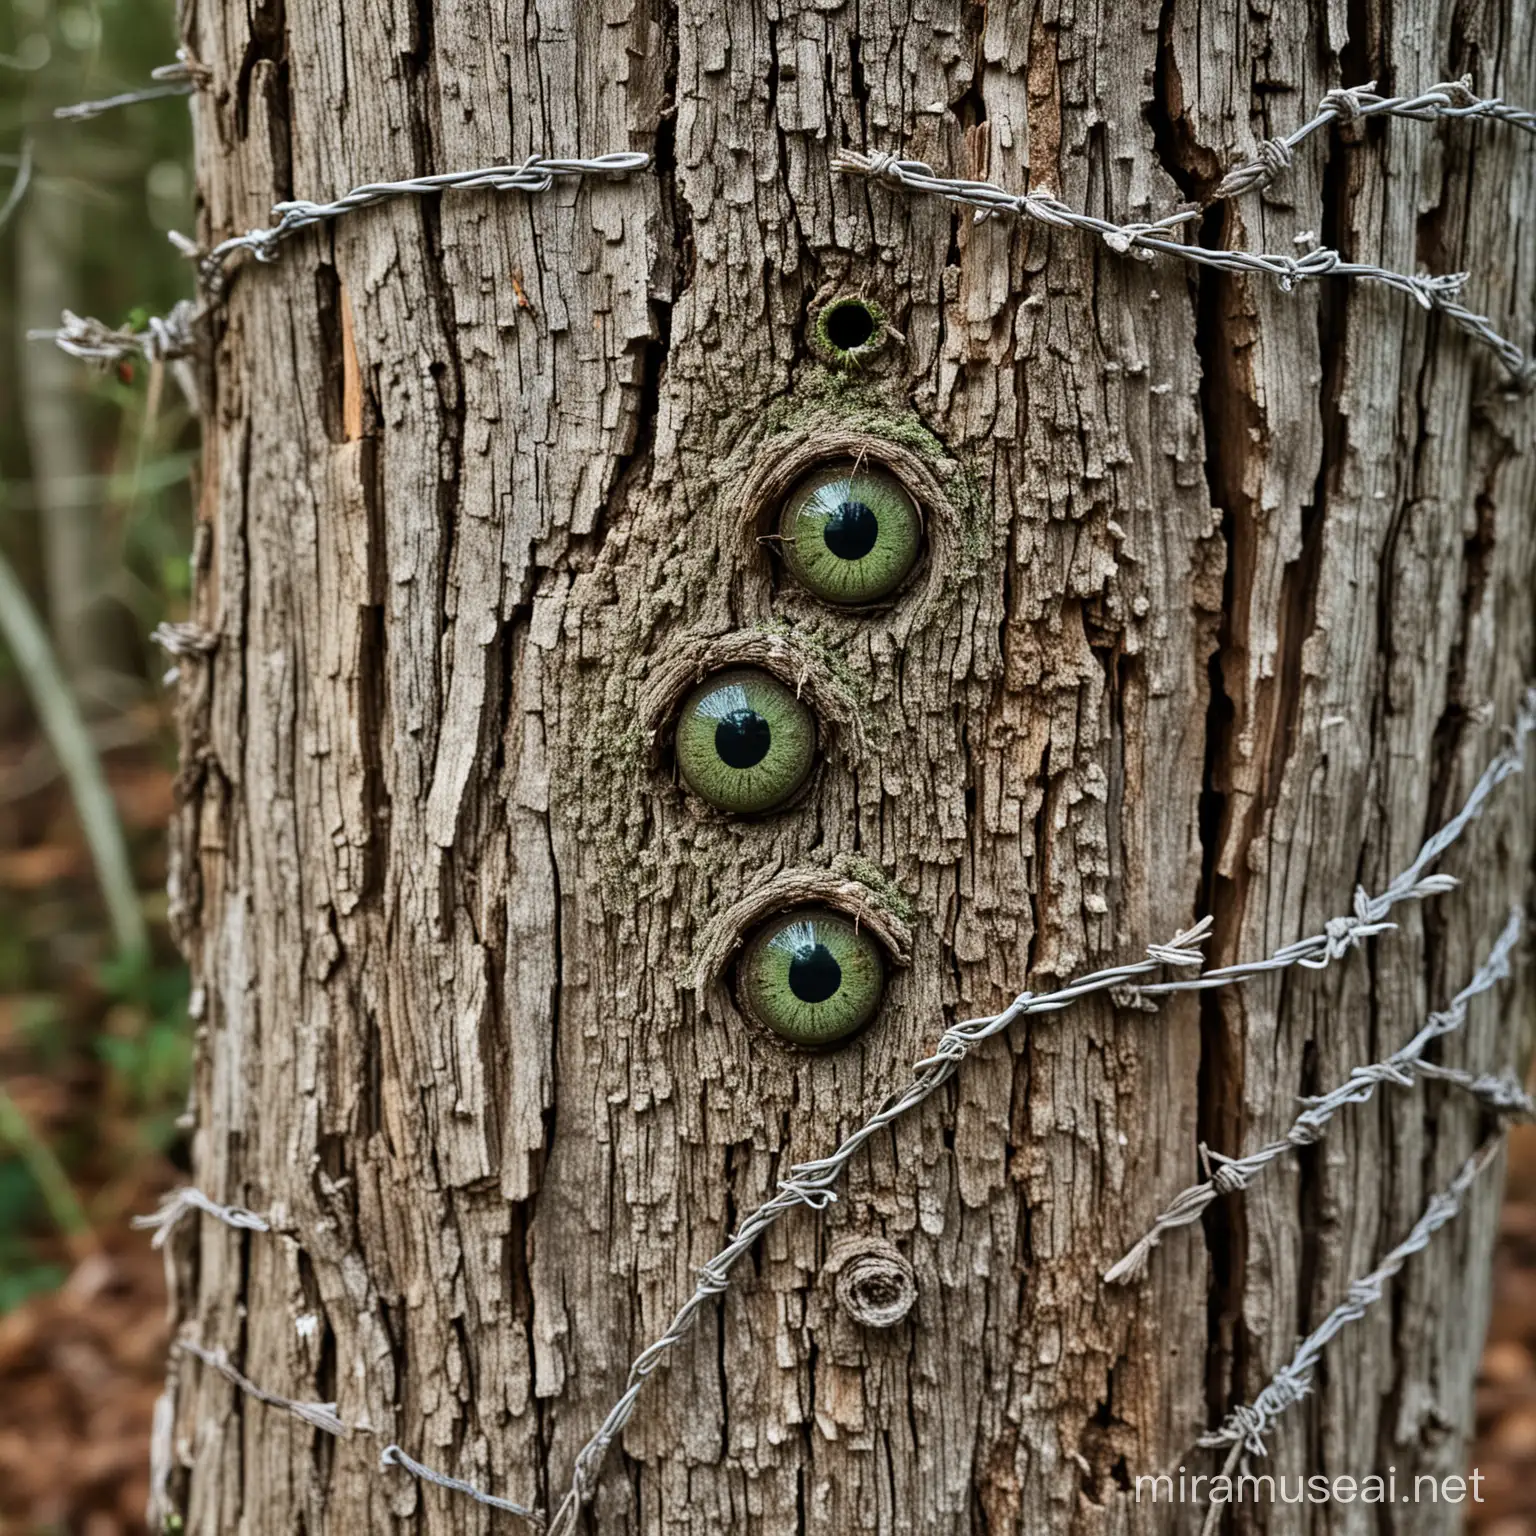 On this little piece of old and rotten wood resting on the forest ground, i see  three vertical green eyes that are watching me. Everywhere around the piece of wood is grimping a sort of barbed wire plant, that is trying to catch me.